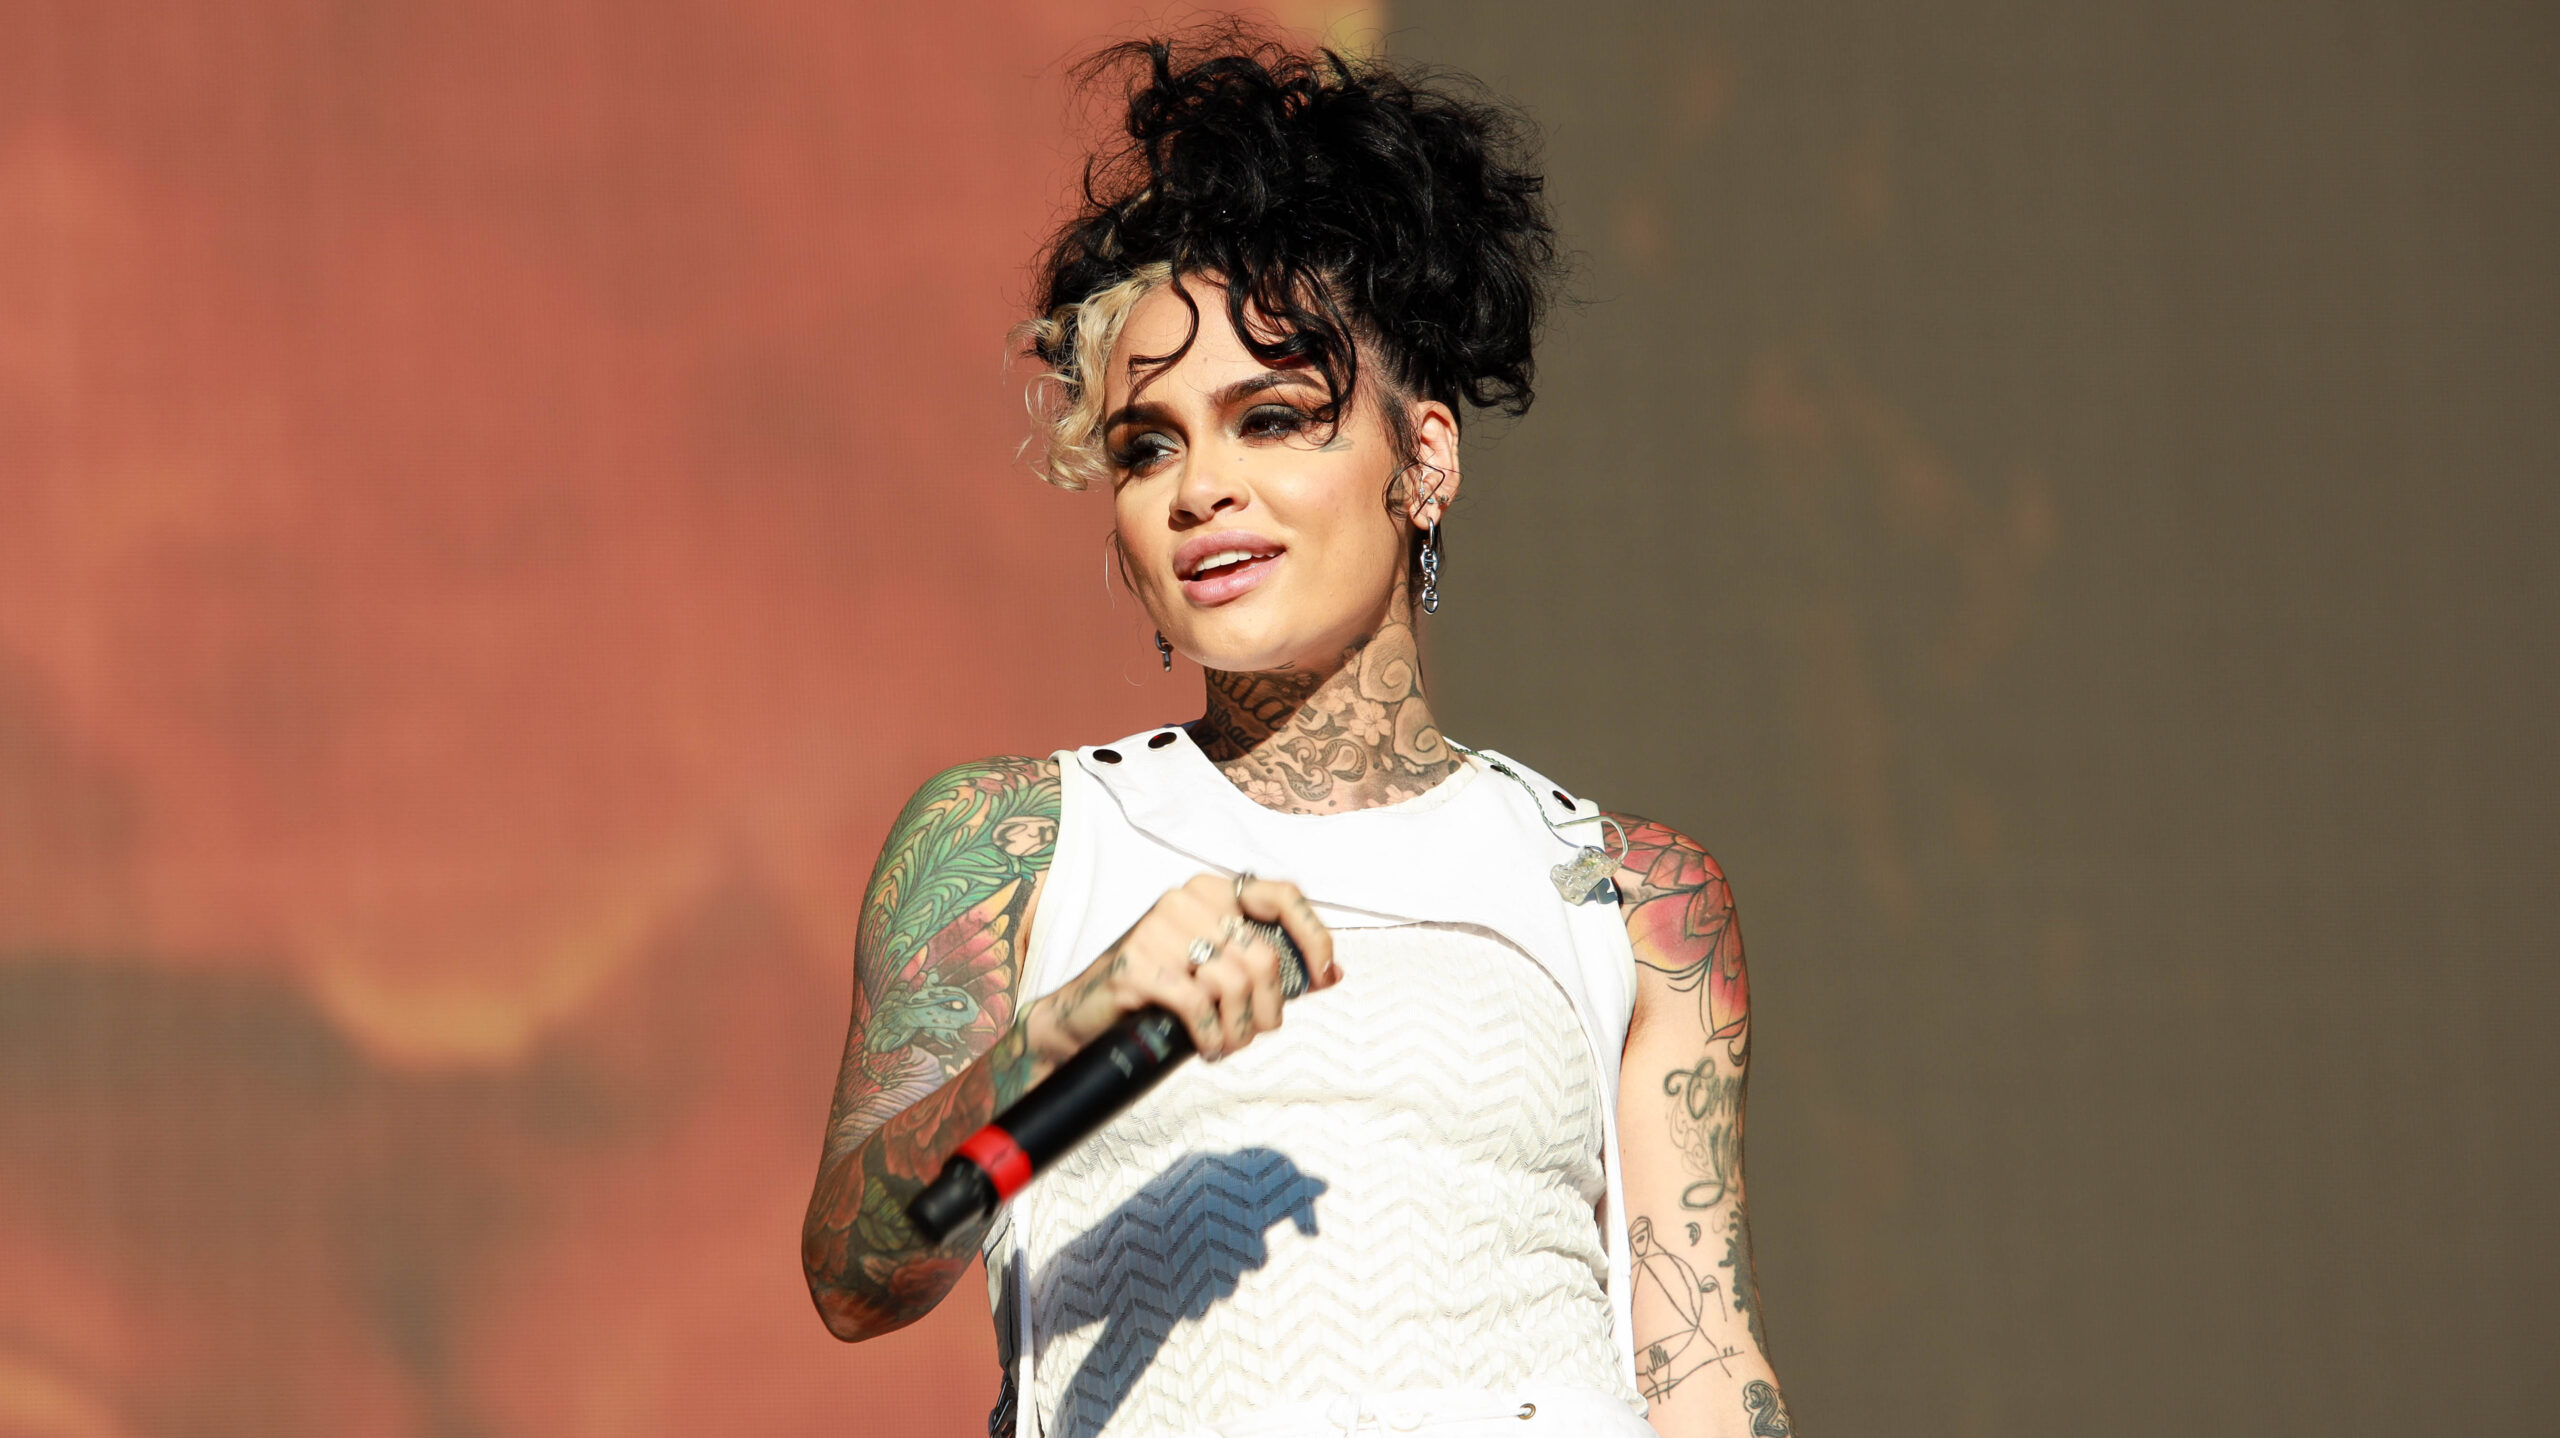 Kehlani Talks About Having Breast Implants Removed: ‘I Let The World Bully Me Into Feeling Like I Needed This’